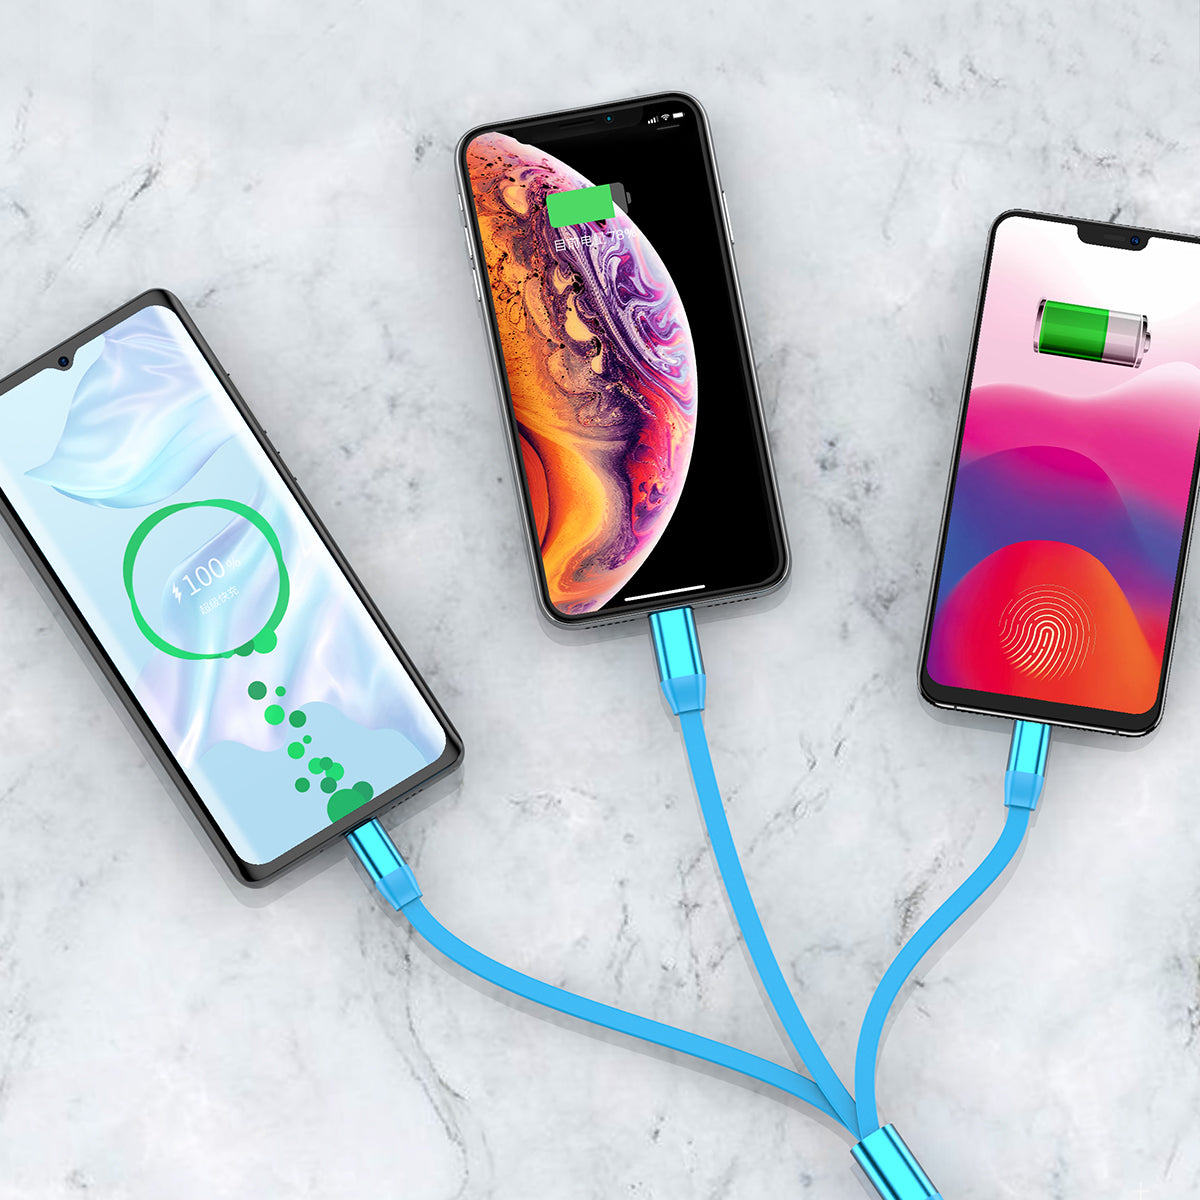 Ladis'Benefit Retractable 3 in 1 Colorful Charge & Sync Cable